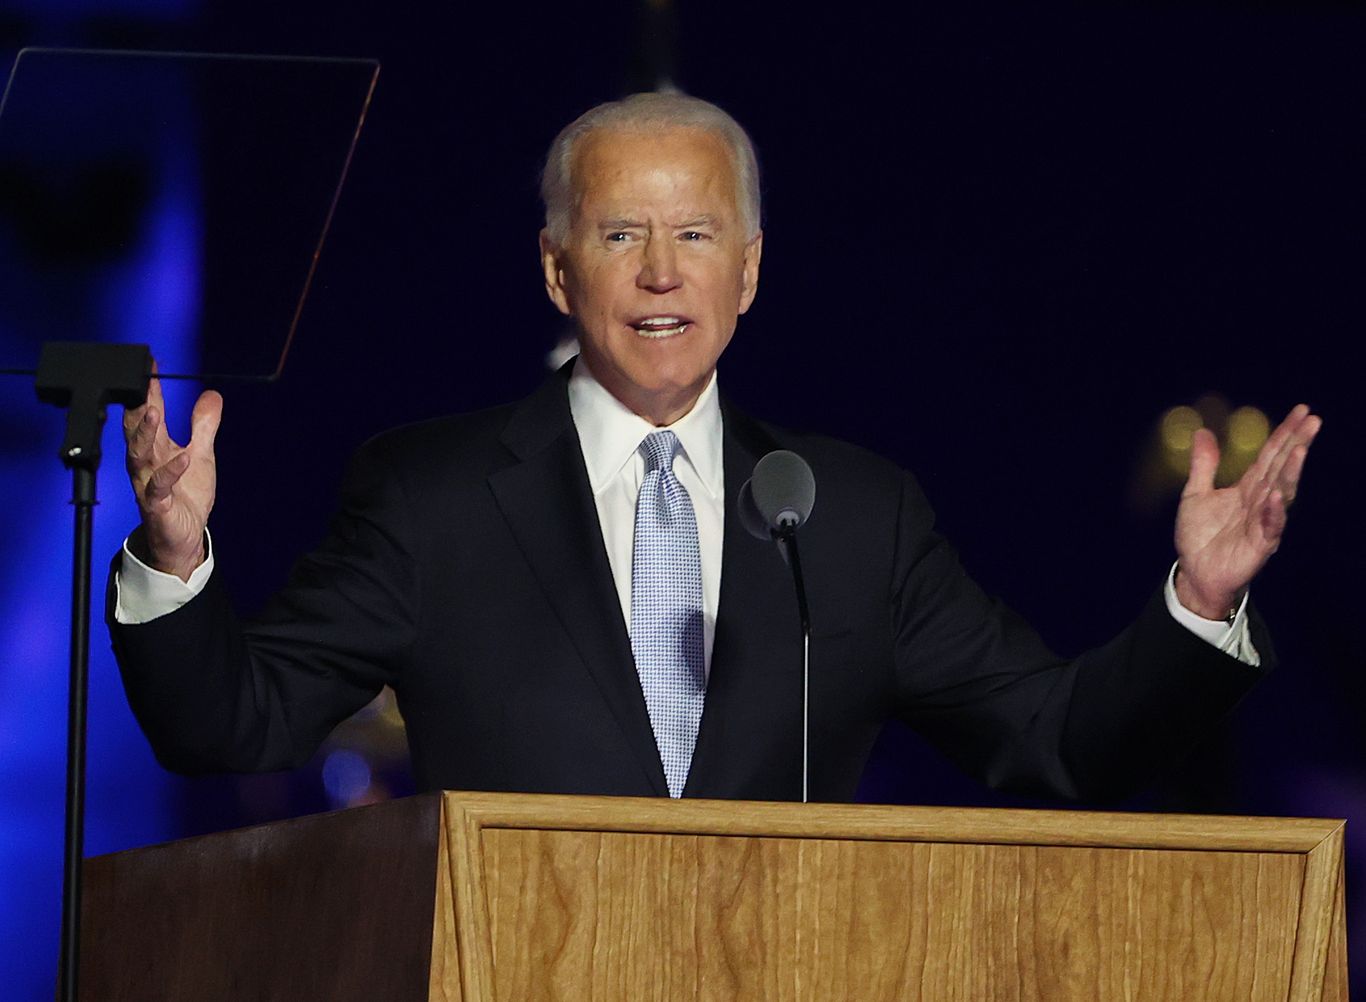 Biden: "This is the time to heal in America" thumbnail